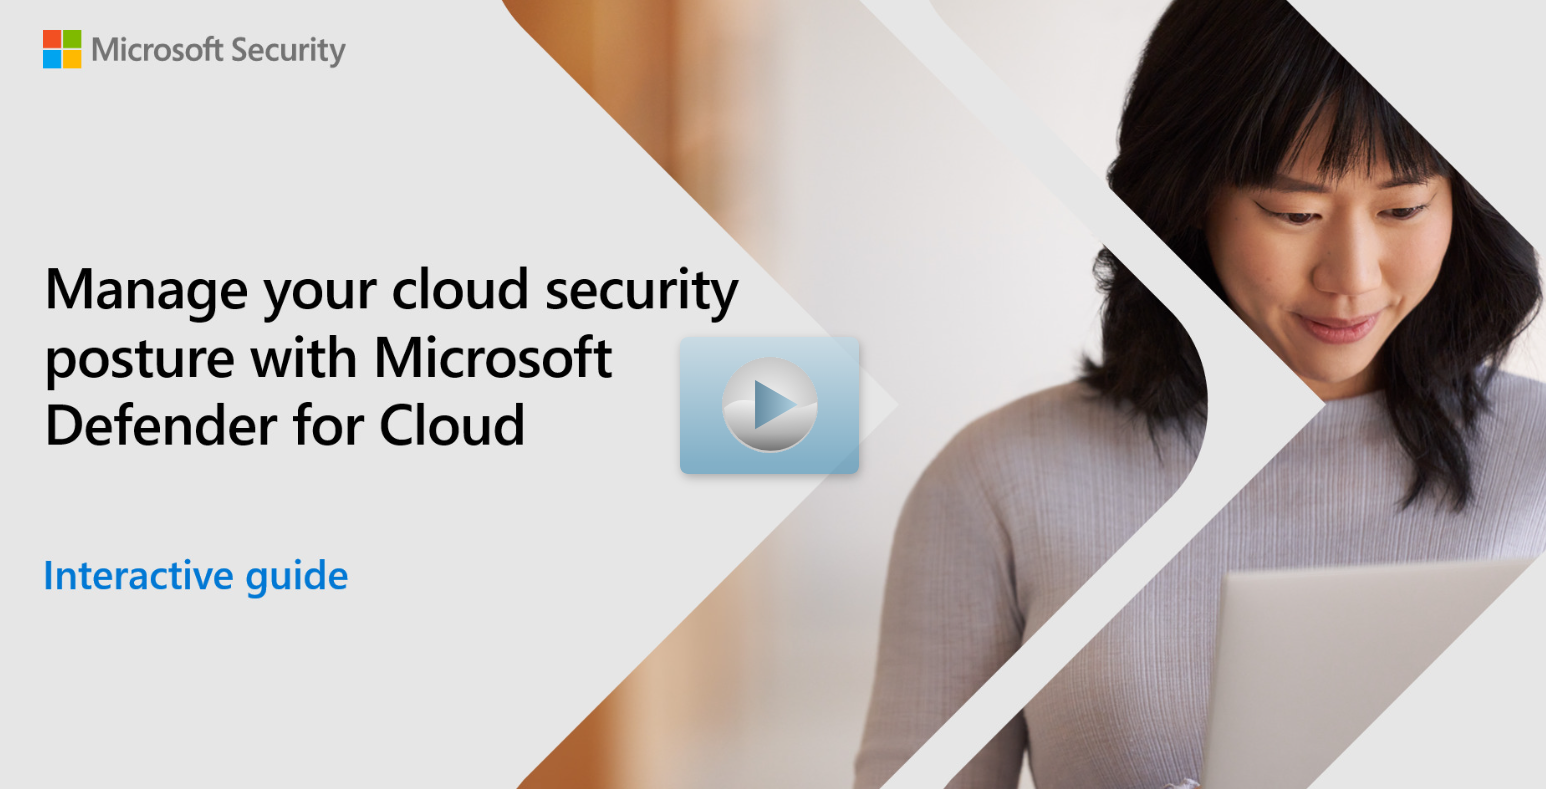 Screenshot that shows an interactive guide with the title 'Manage your cloud security posture with Microsoft Defender for Cloud'.